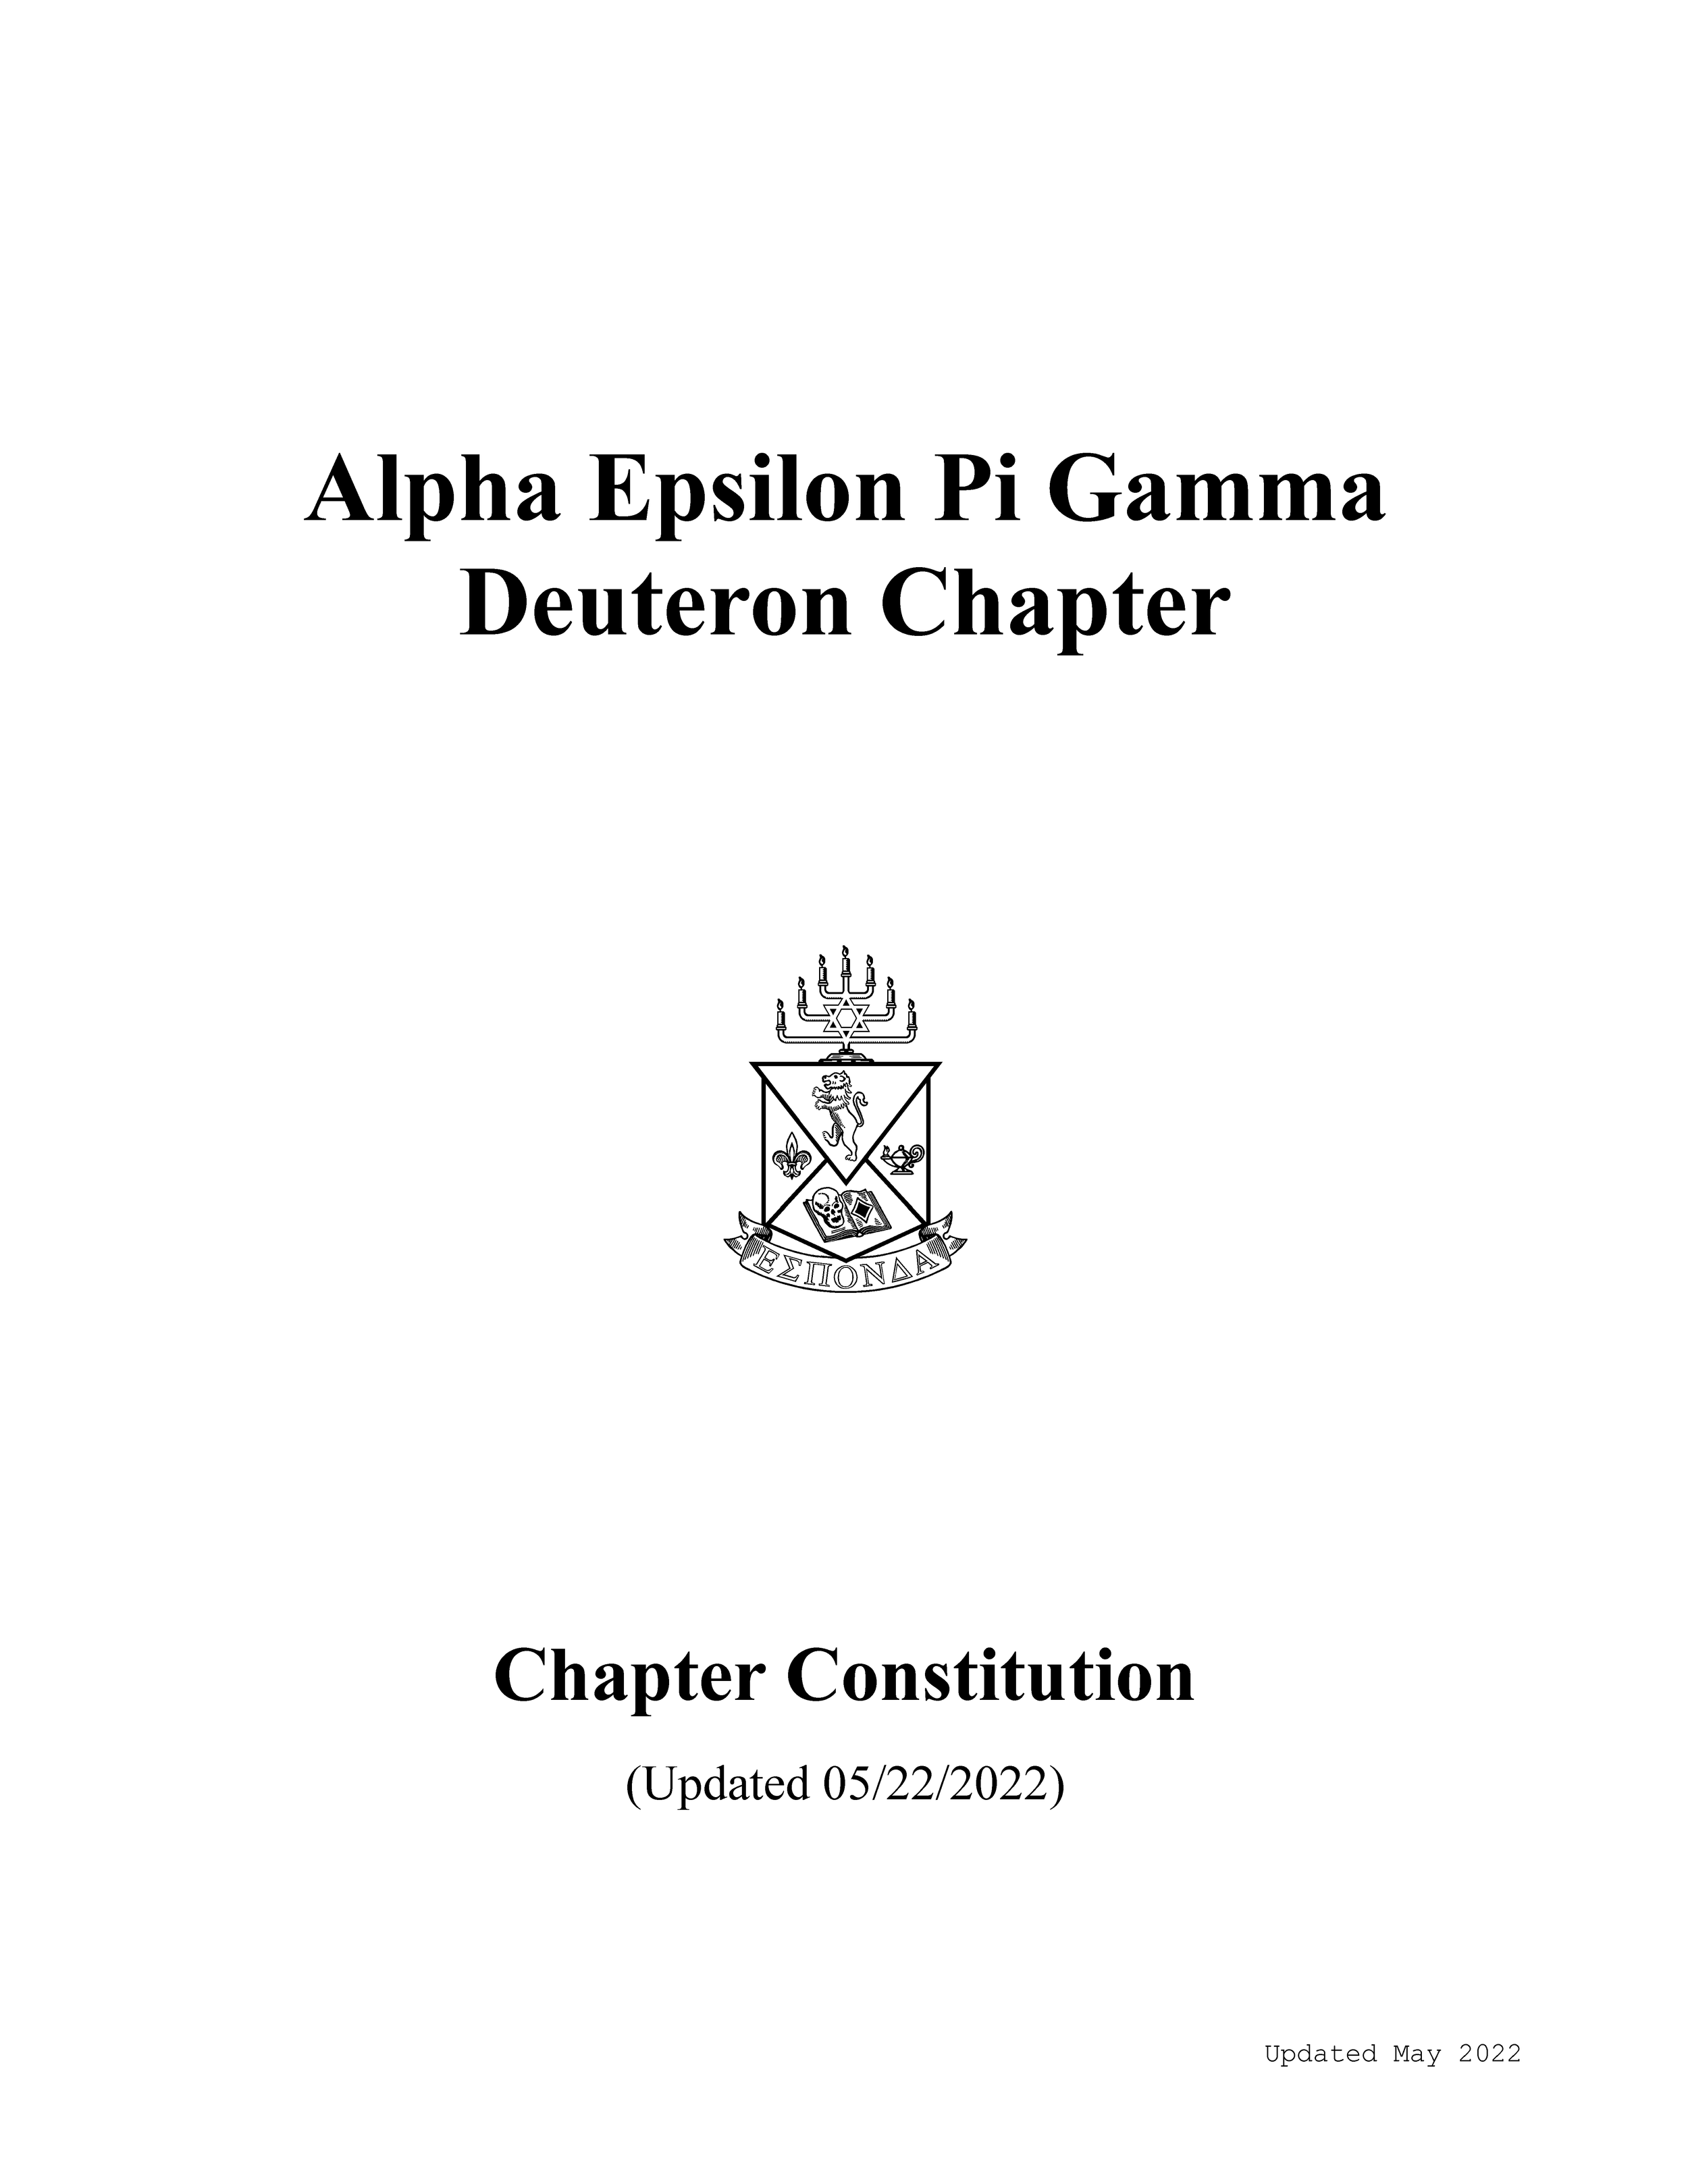 Gamma_Deuteron_Consitution_Updated_Page_01.png